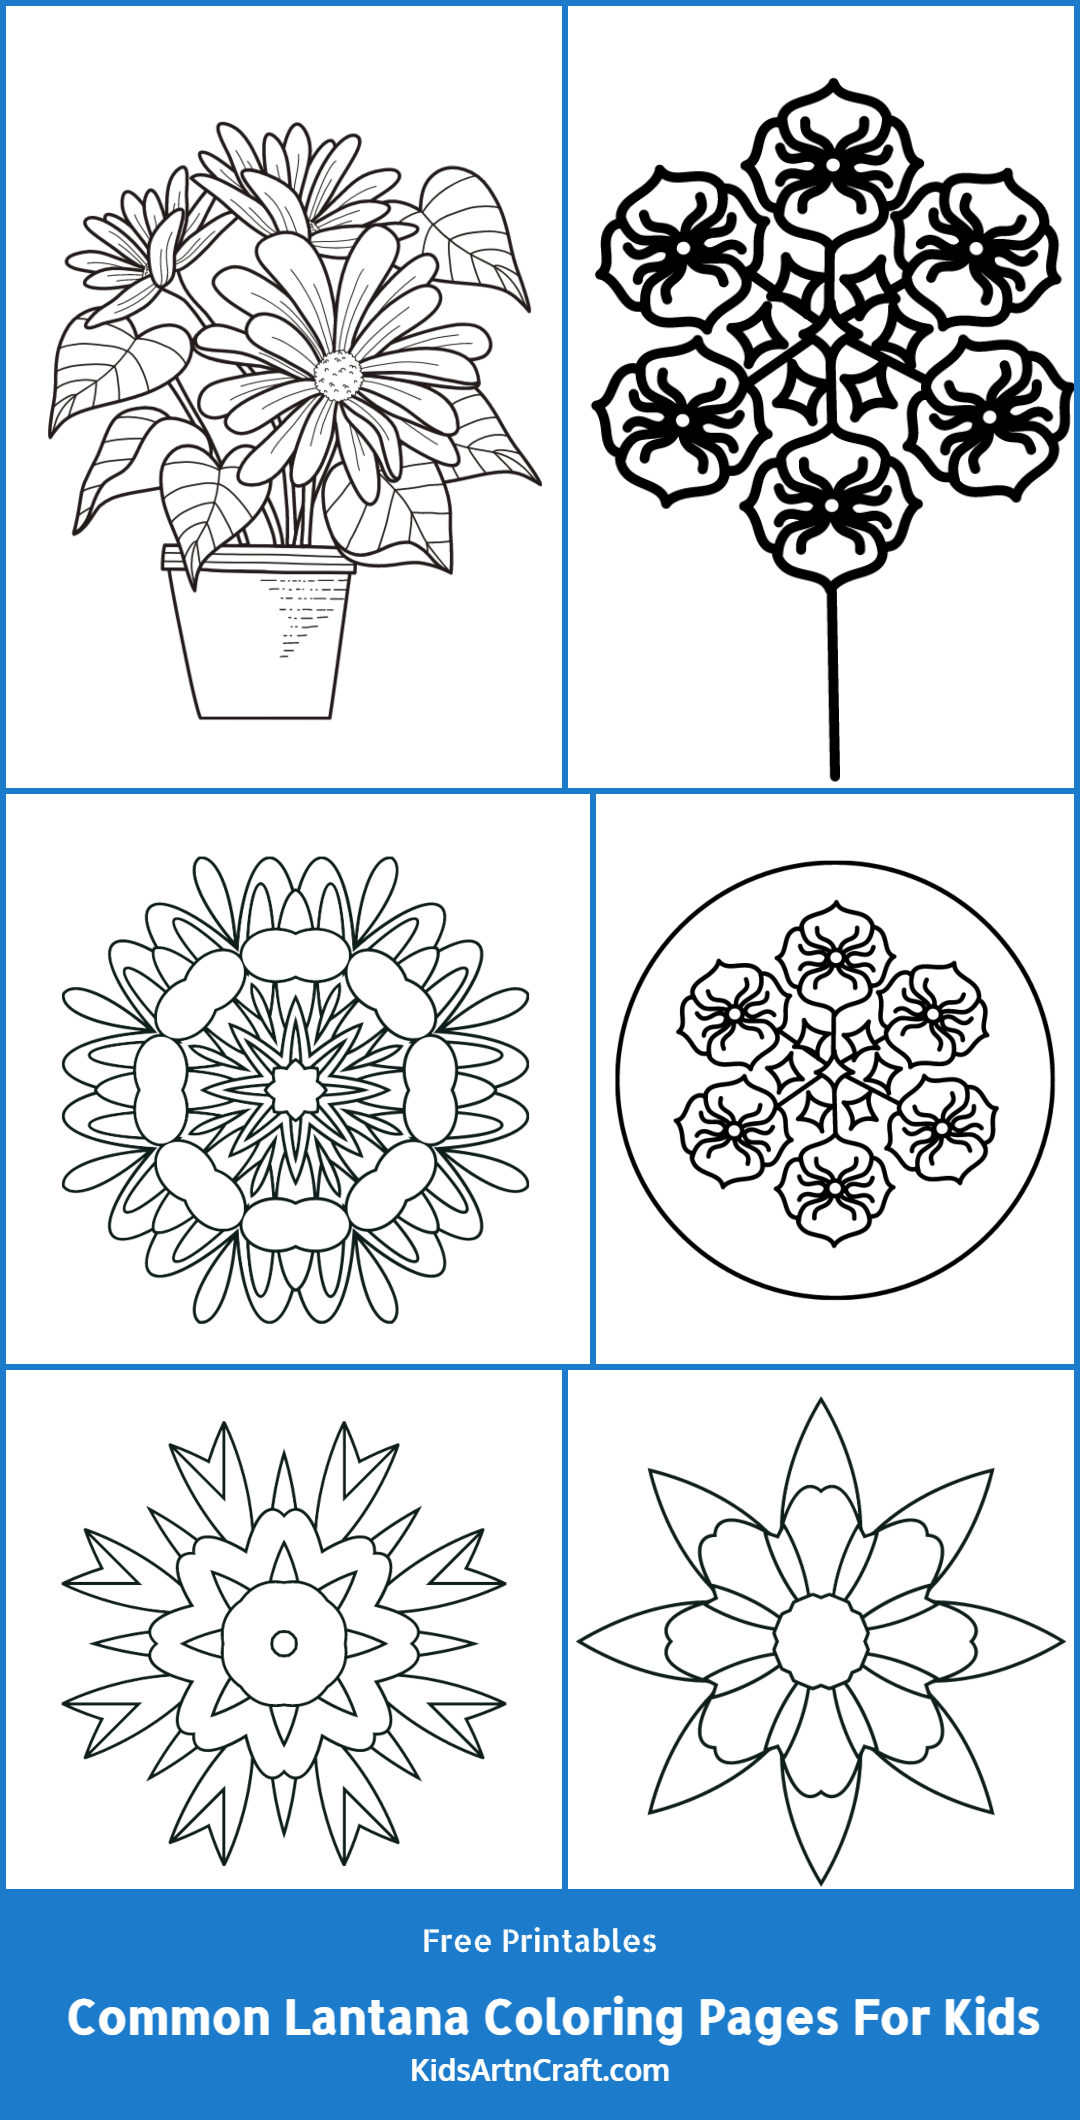 Common Lantana Coloring Pages For Kids – Free Printables